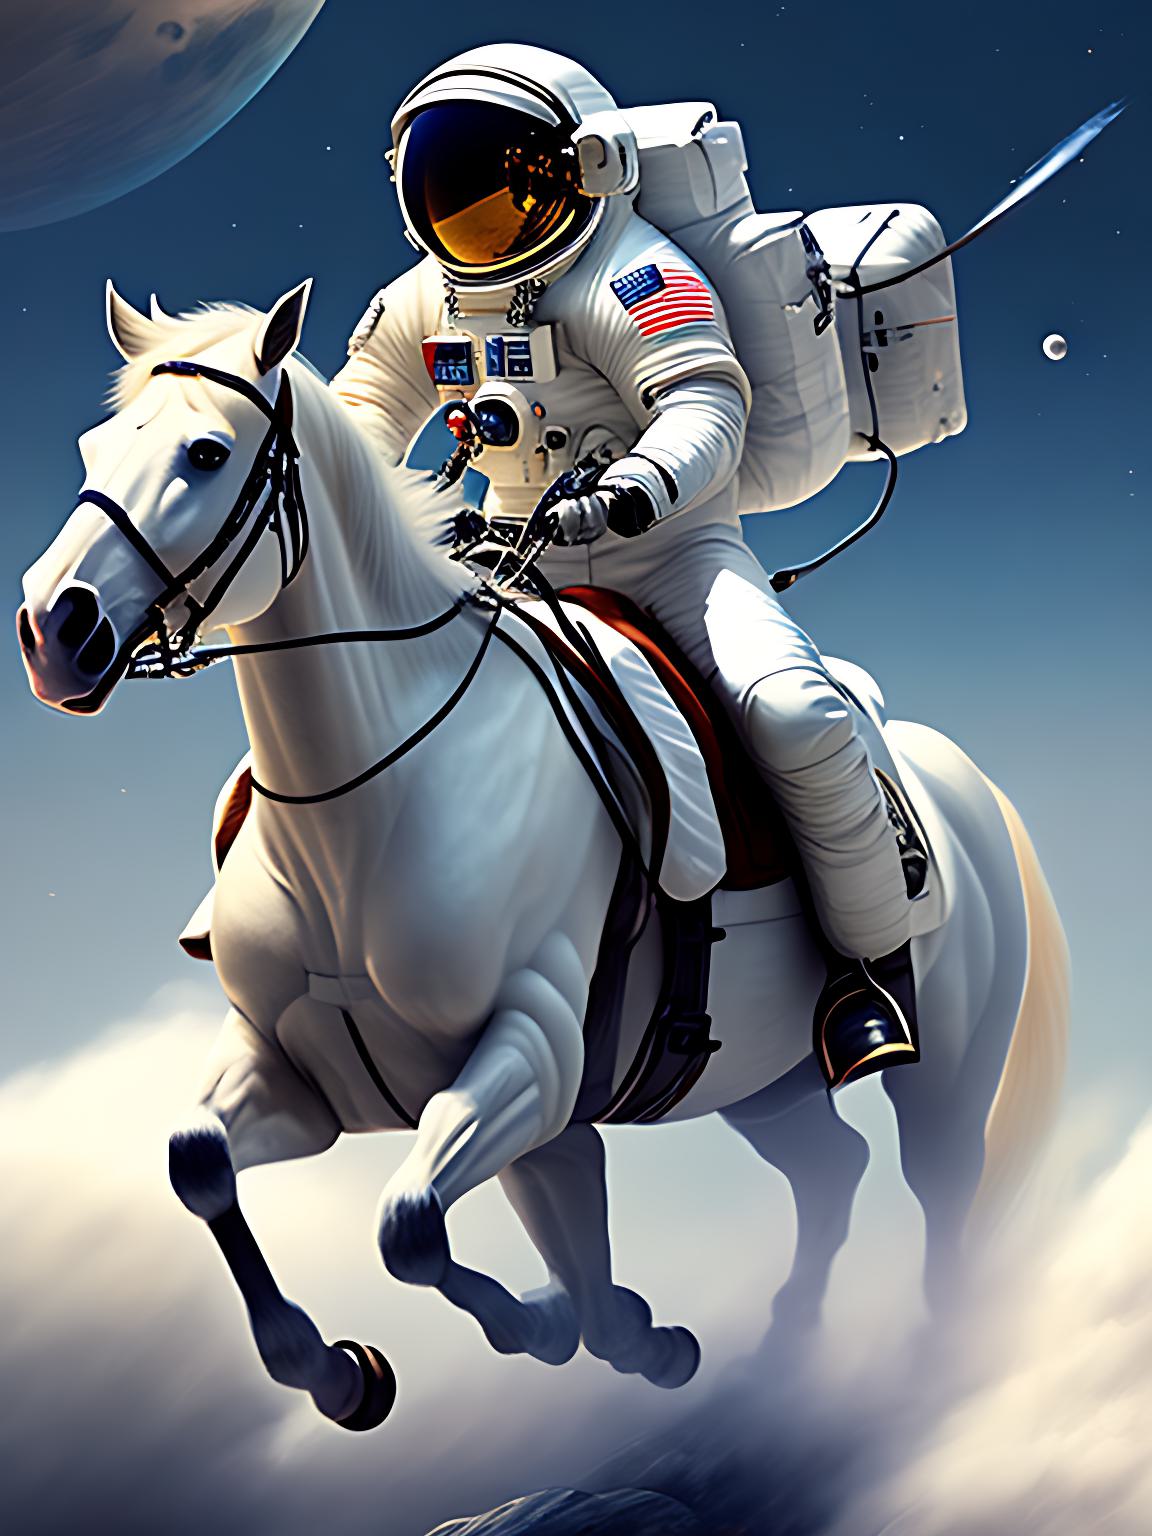 character concept art of astronaut riding a horse made in fotor ai concept art generator